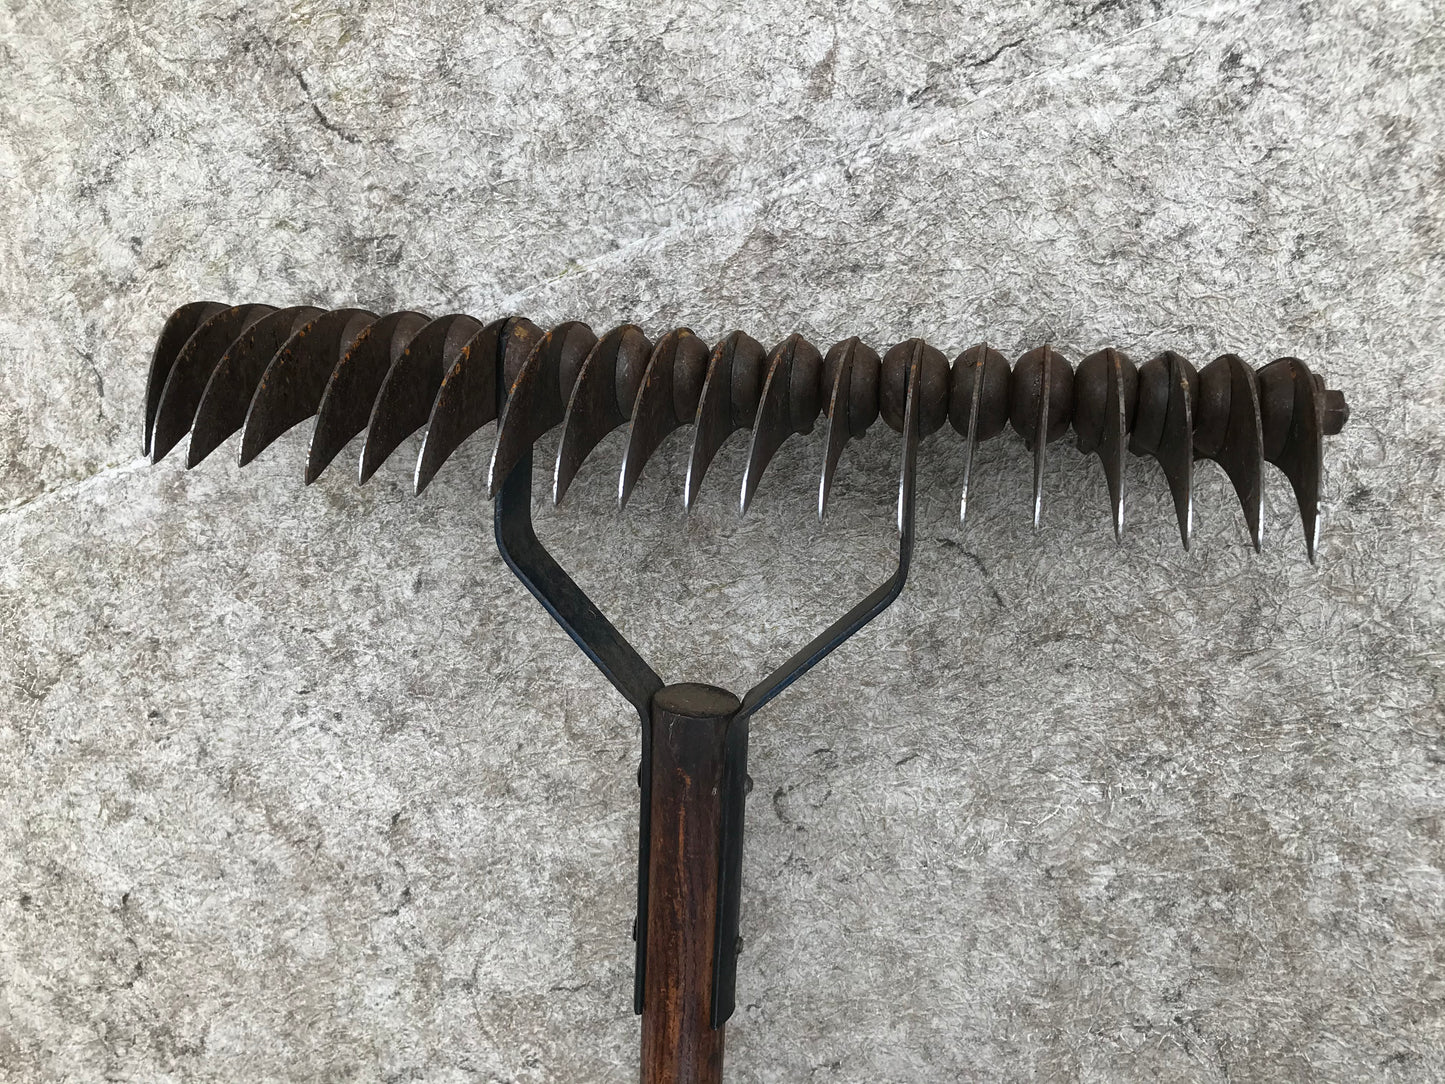 Farm and Garden Antique Solid Heavy Wood Lawn Thatching Rake 1950's Made In Canada Outstanding Quality